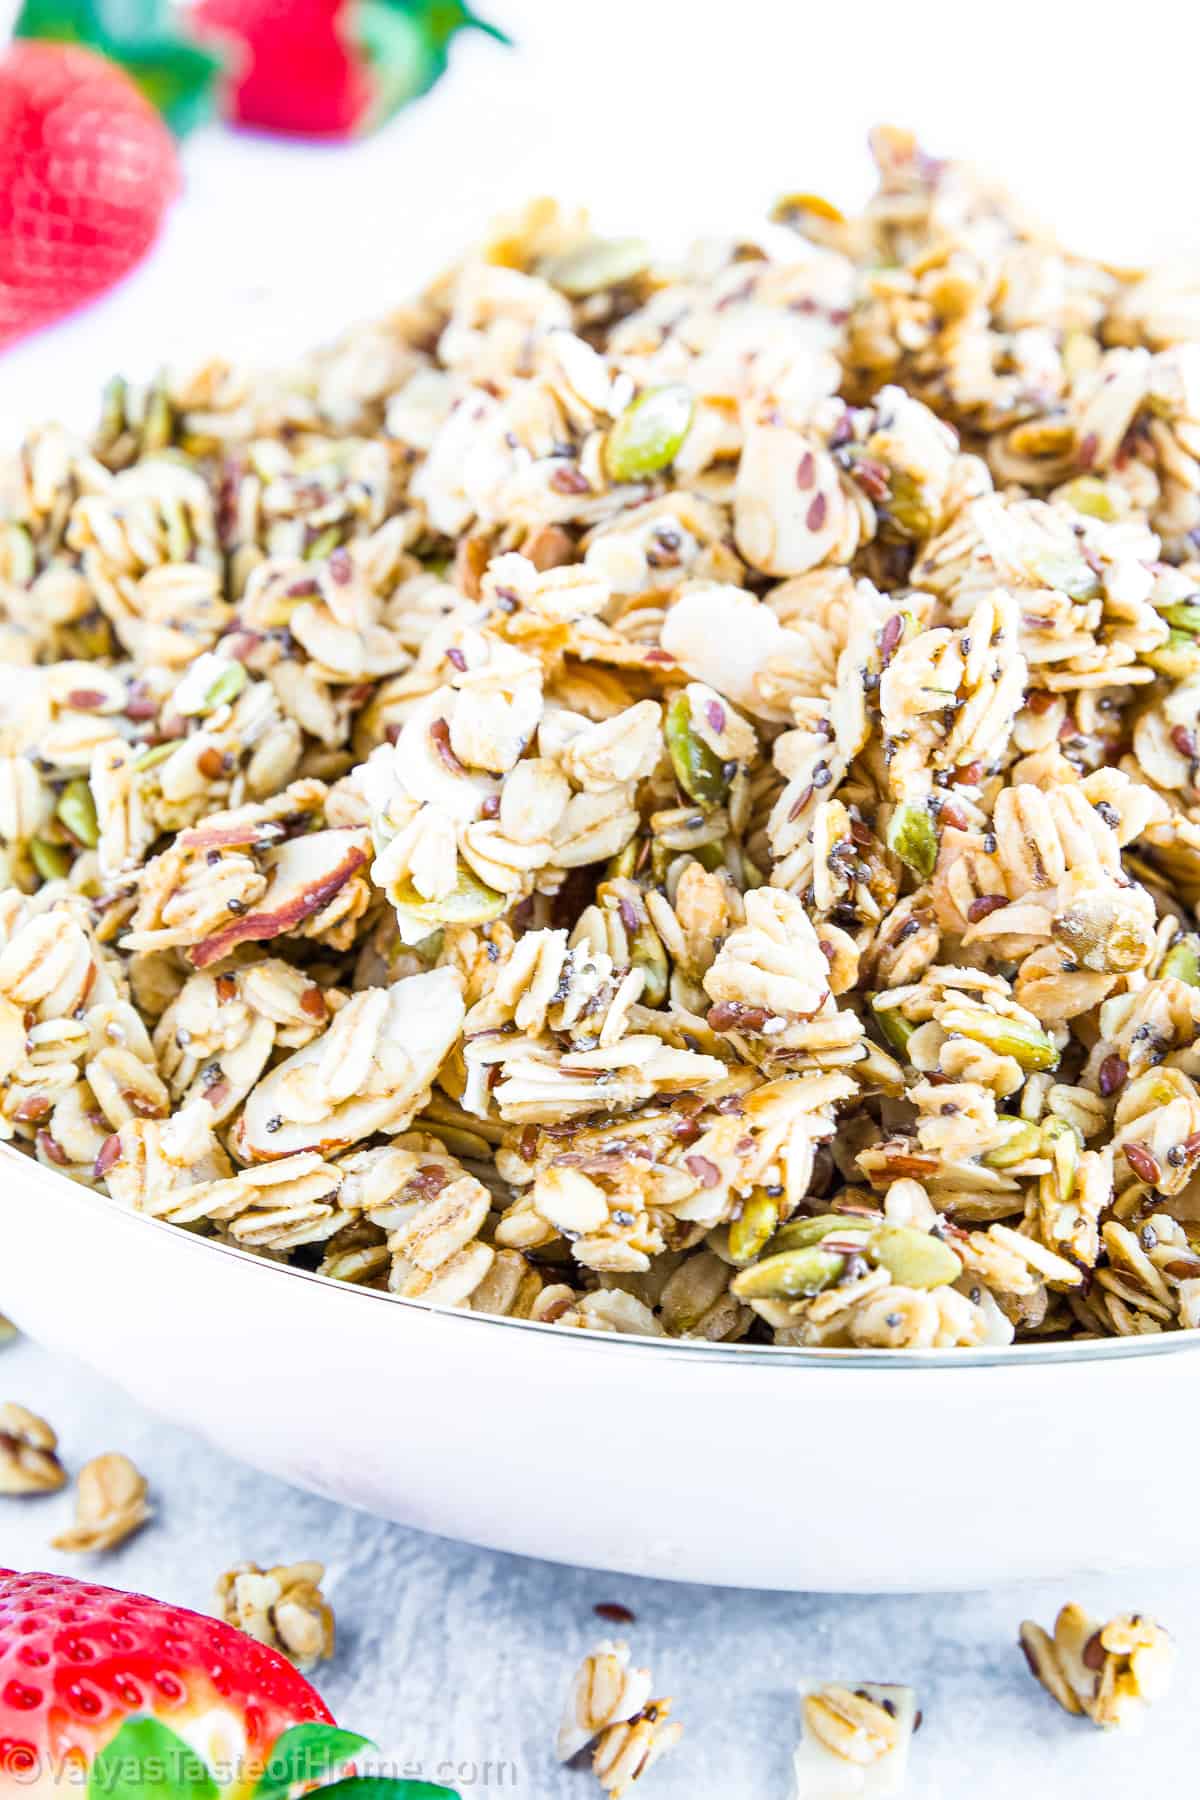 his brown butter maple granola recipe is not your average granola. The brown butter adds a depth of flavor that makes this granola truly unique and irresistible, perfect for a wholesome breakfast or a healthy snack on the go.